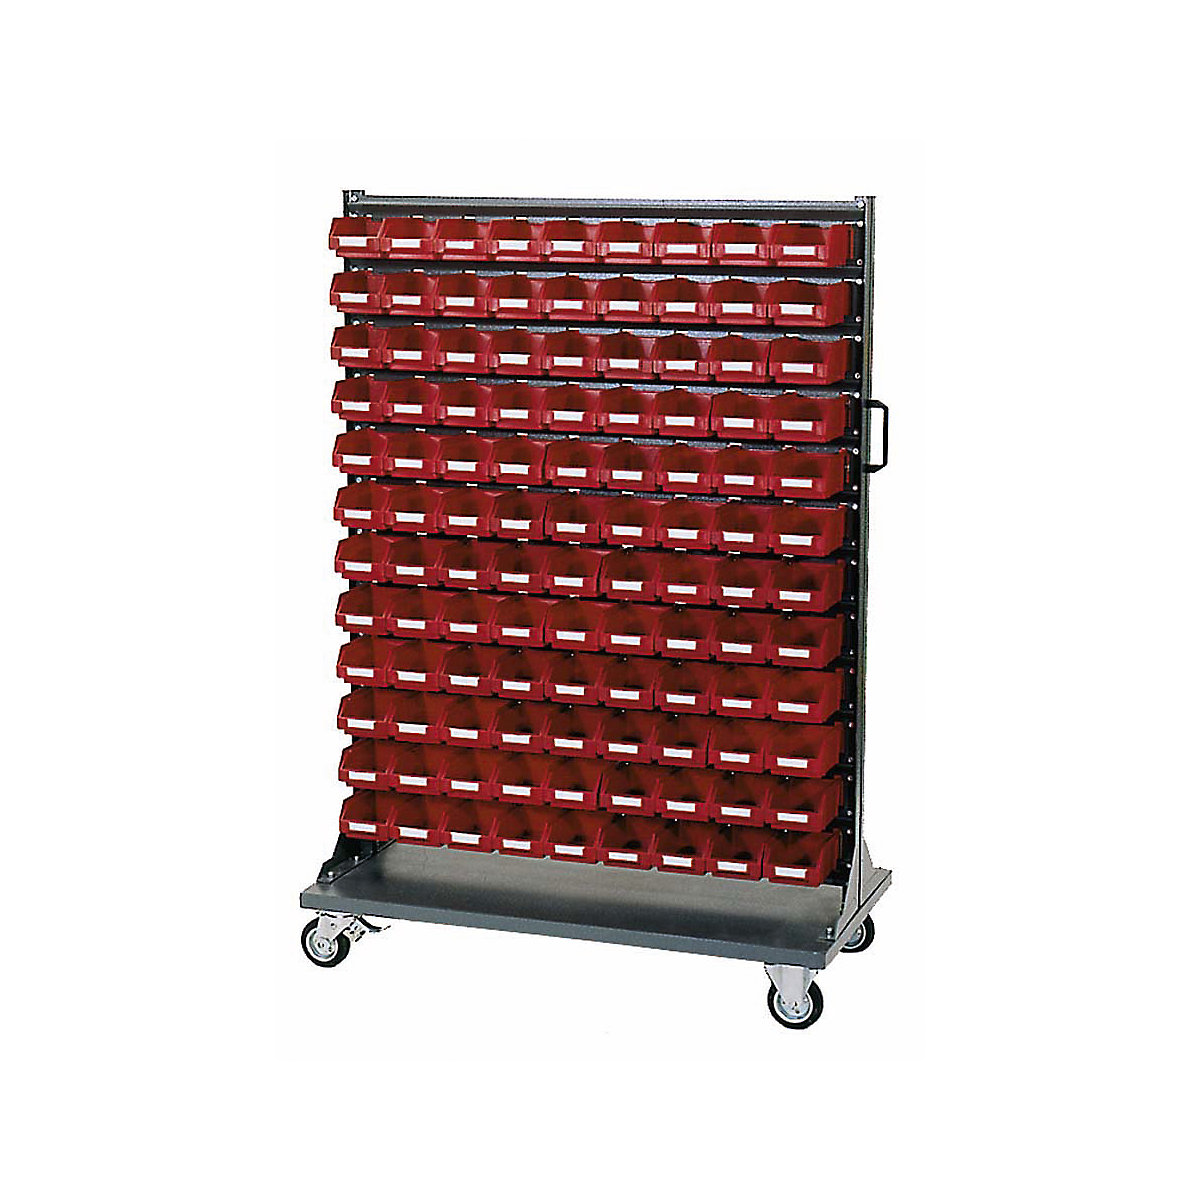 Storage shelf unit dolly, with open fronted storage bins, height 1485 mm-3